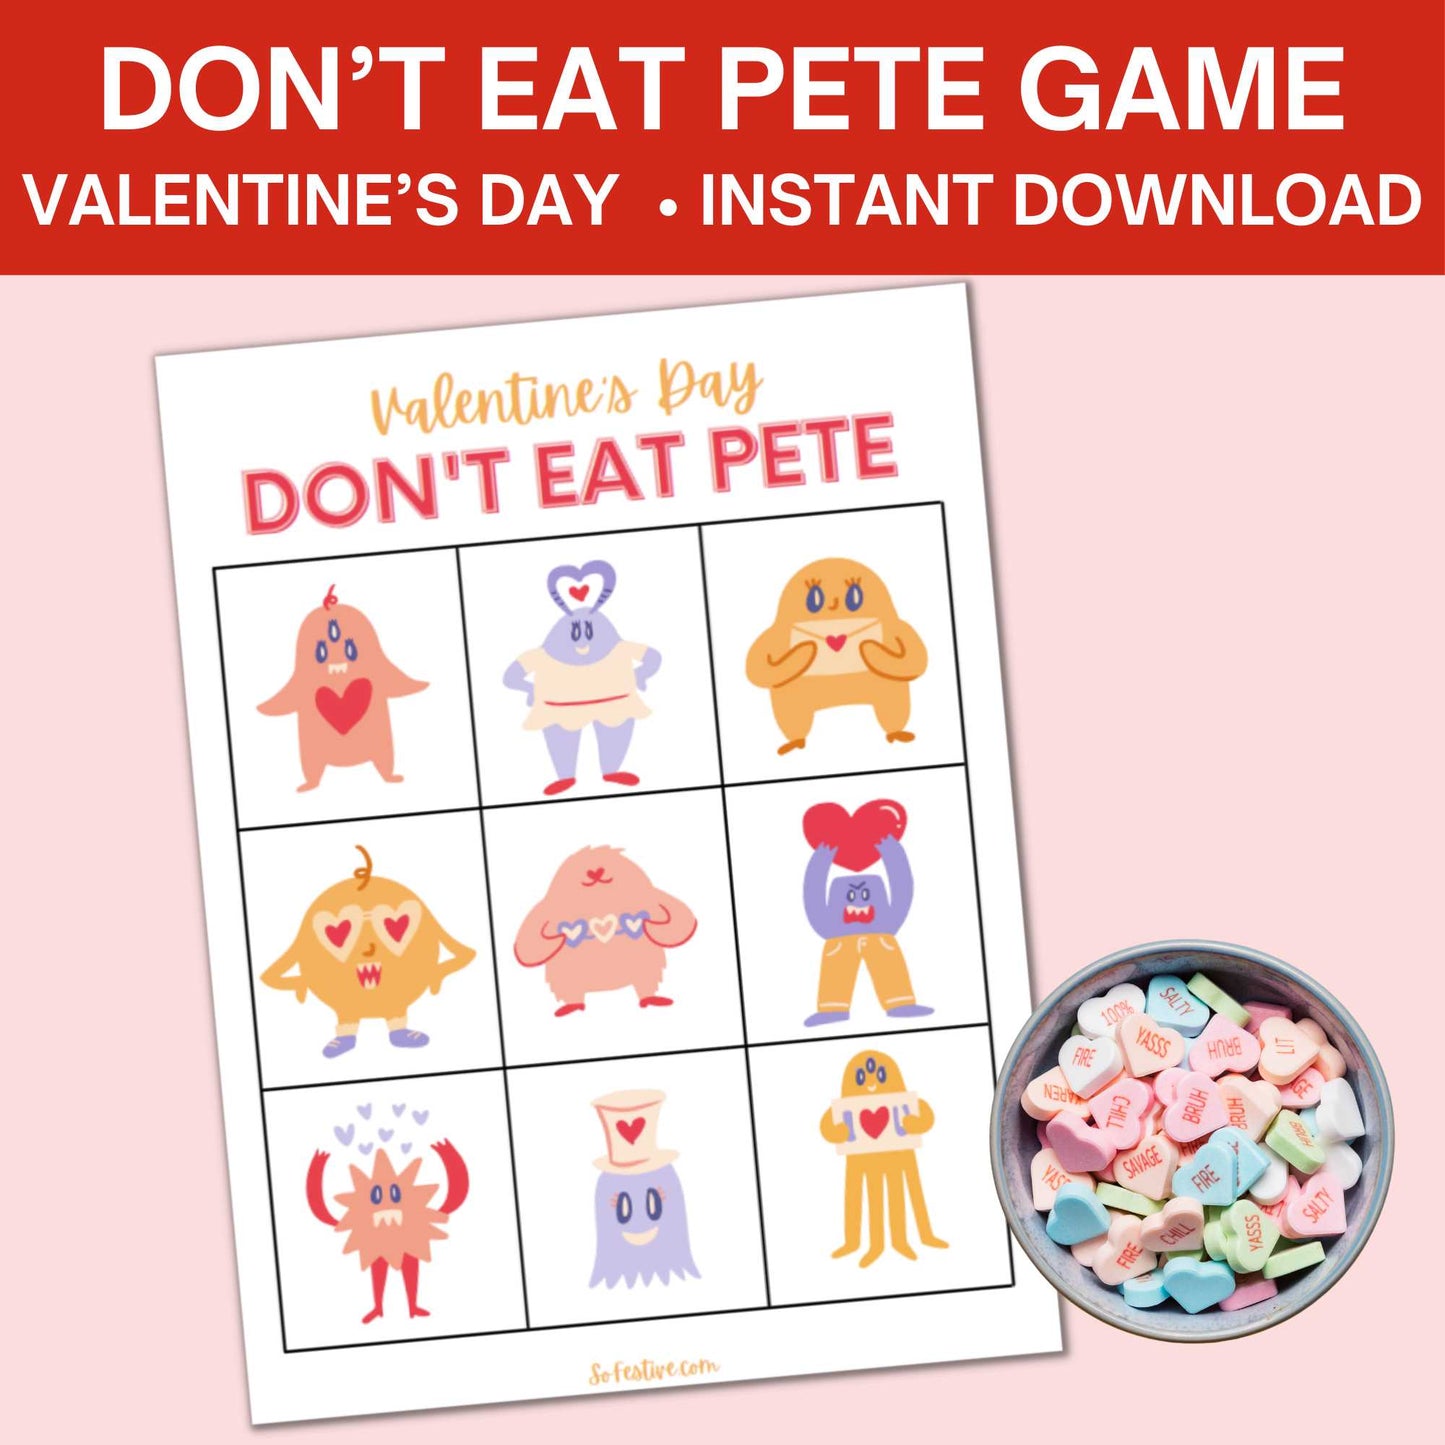 Don't Eat Pete- Valentine's Day Game